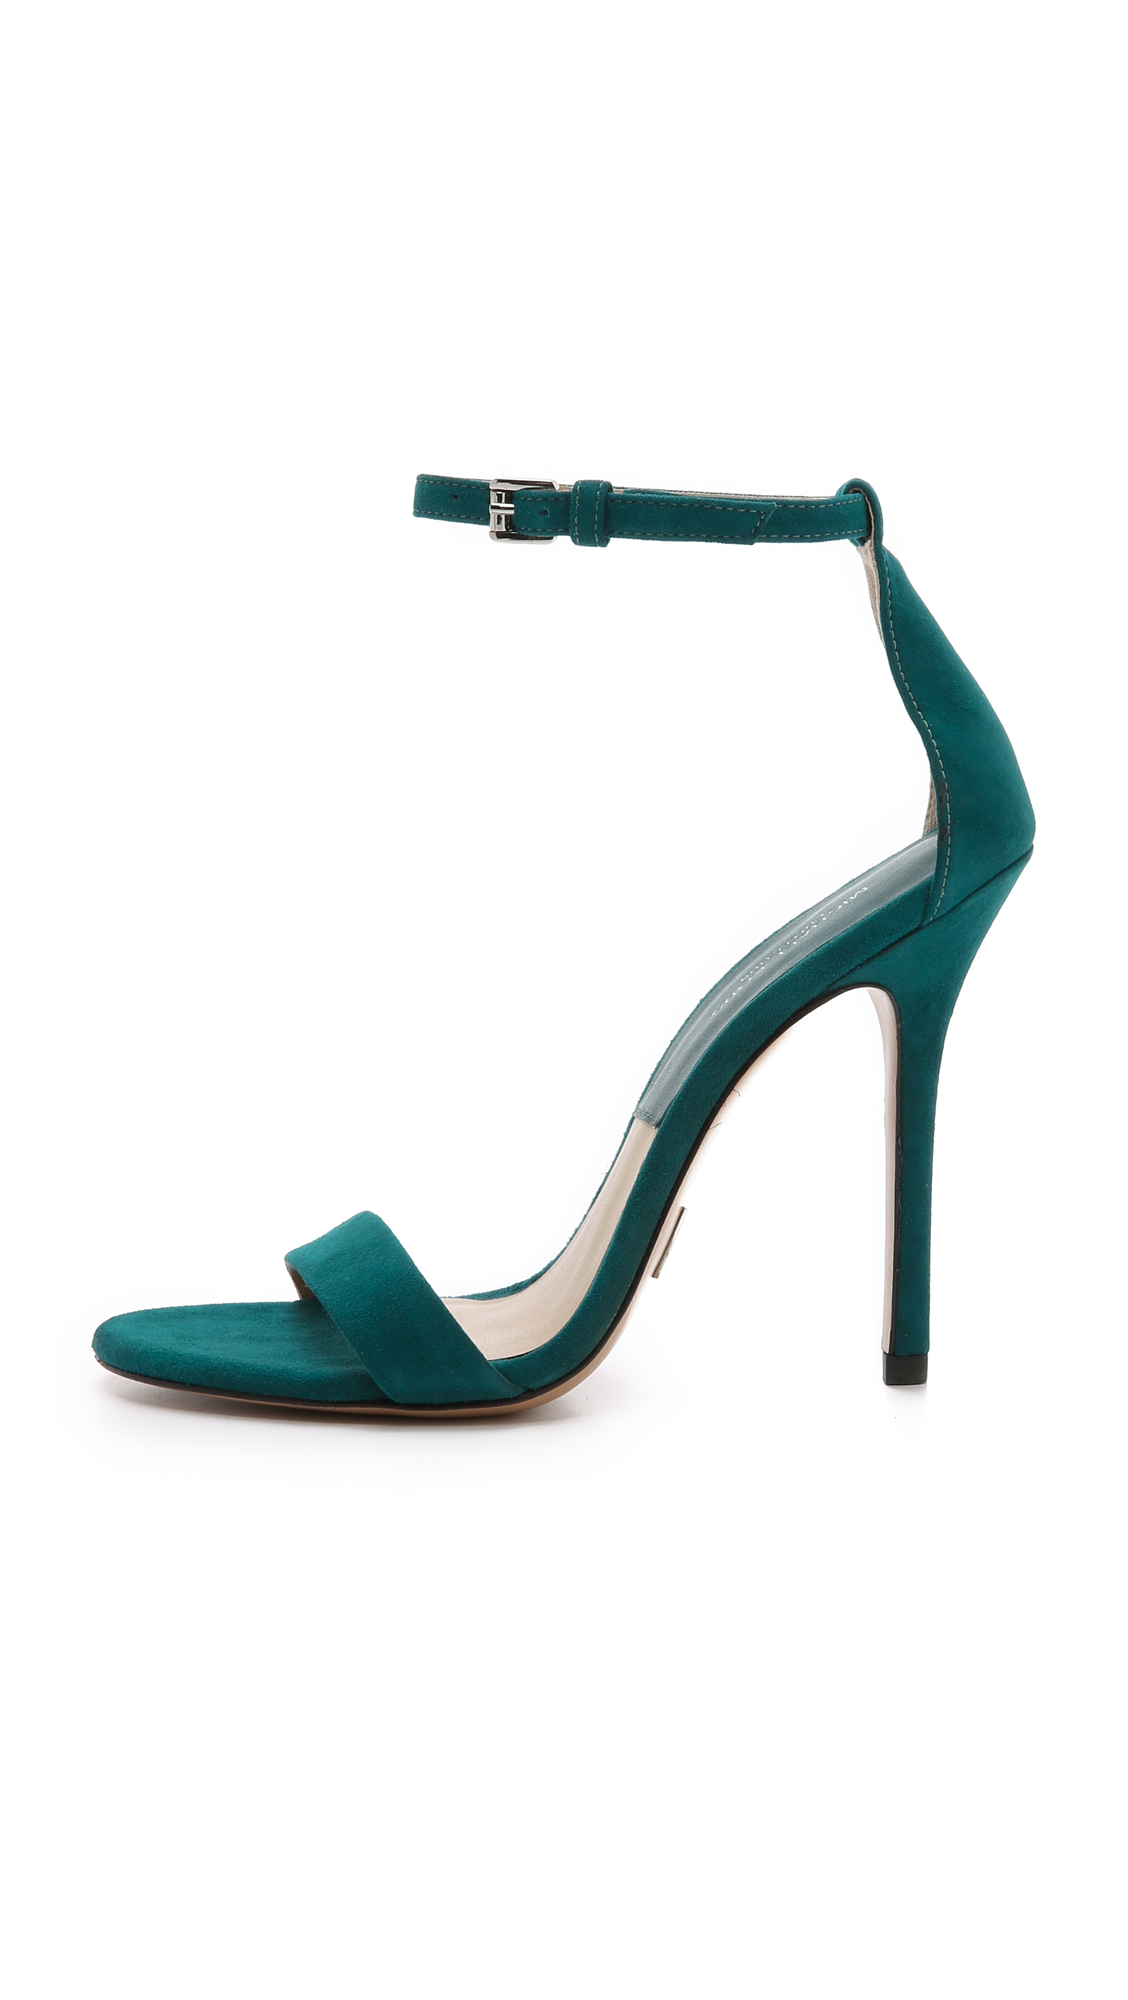 Michael Kors Jacqueline Sandals - Peacock in Green | Lyst